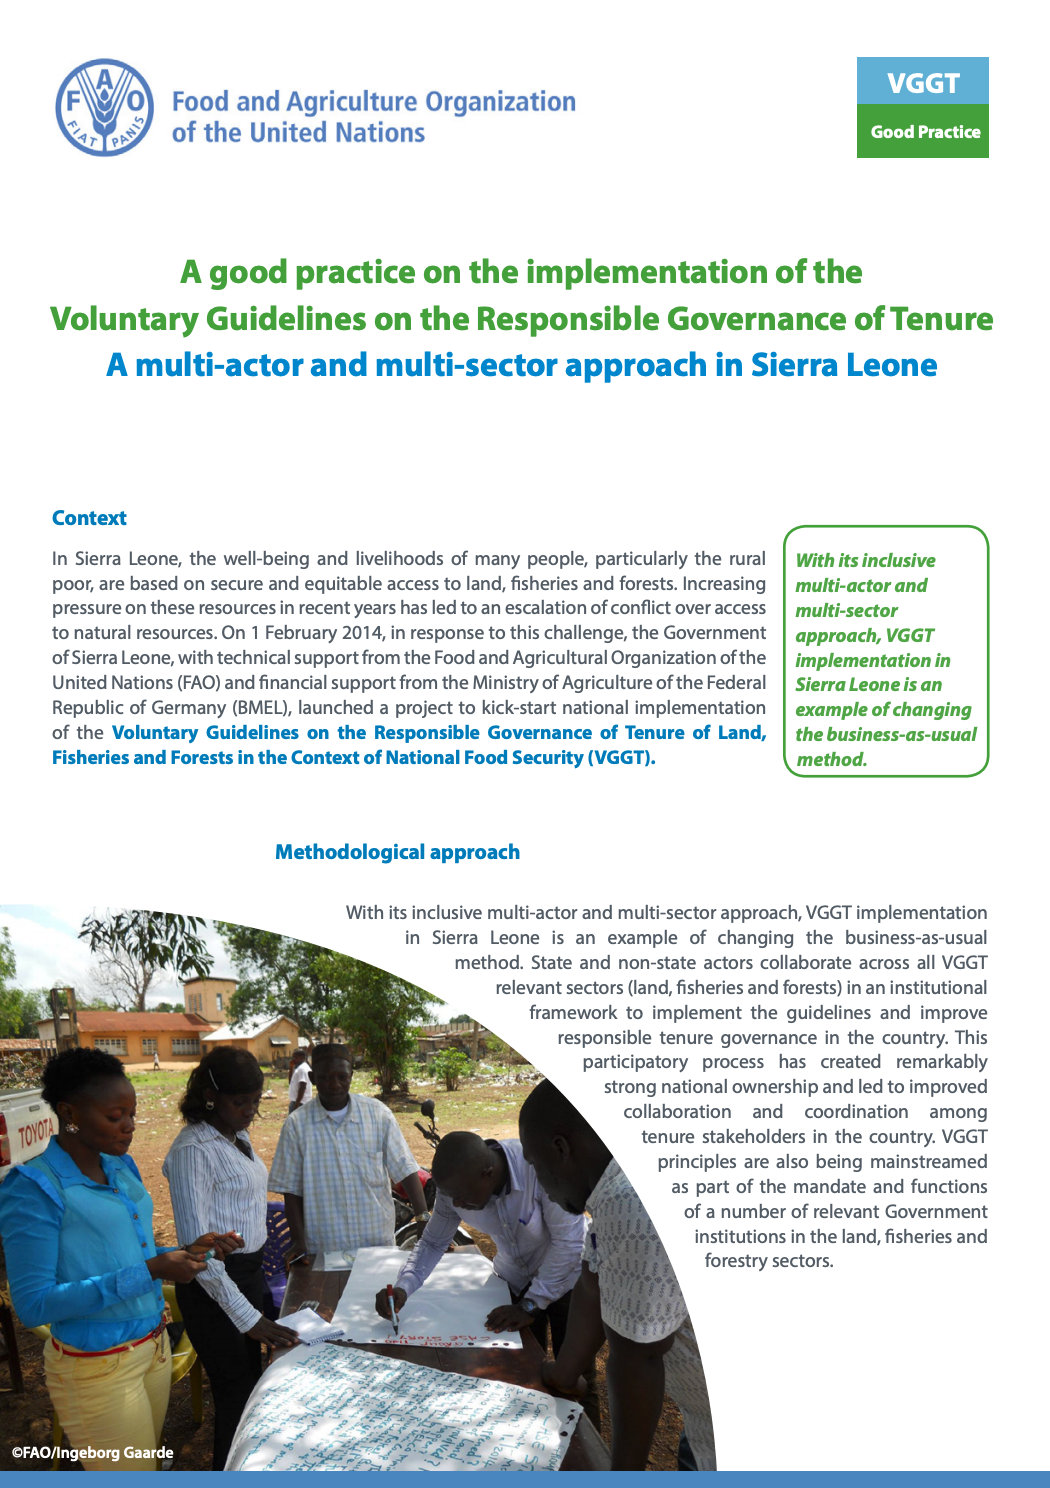 Screenshot 2019-02-14 at 14.01.45.A good practice on the implementation of the Voluntary Guidelines on the Responsible Governance of Tenure: A multi-actor and multi-sector approach in Sierra Leone cover image